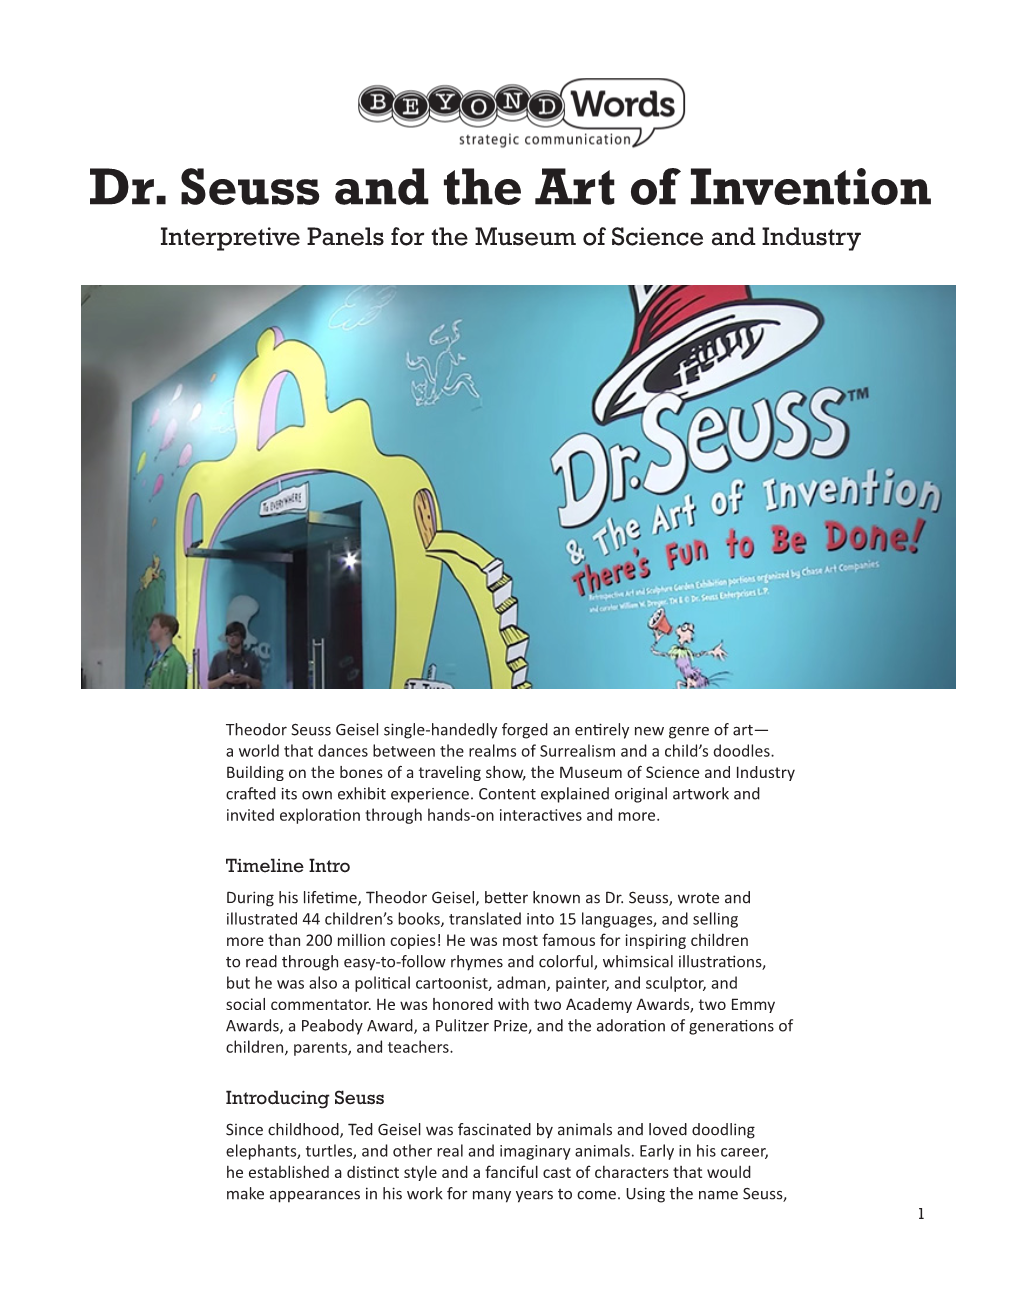 Dr. Seuss and the Art of Invention Interpretive Panels for the Museum of Science and Industry